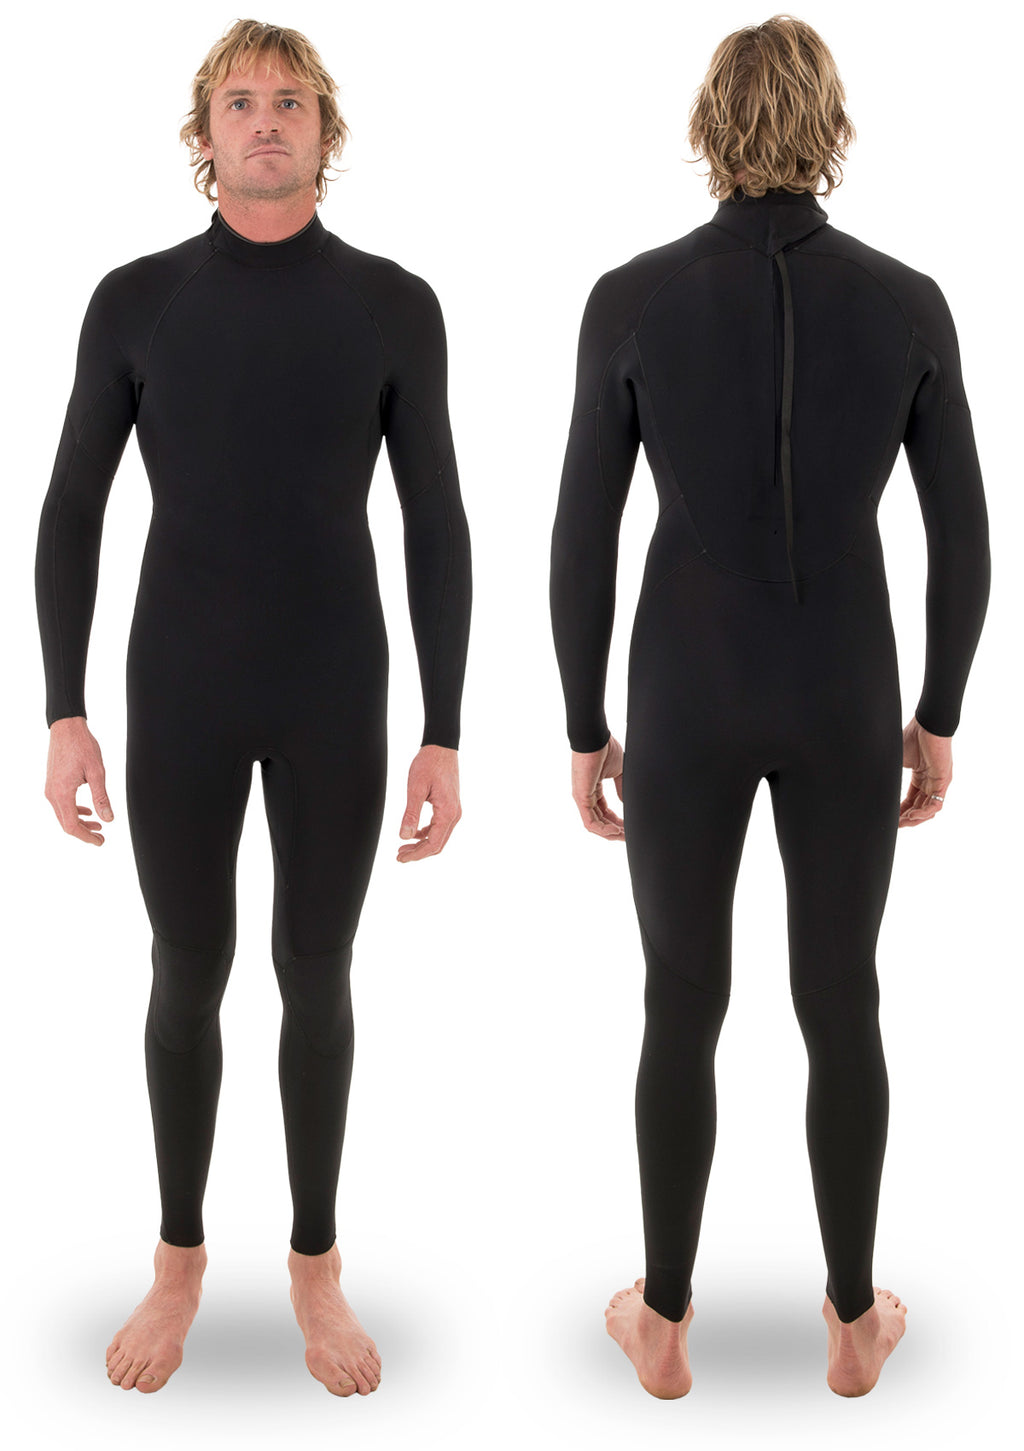 needessentials 3/2 thermal back zip wetsuit laurie towner surfing winter black non branded